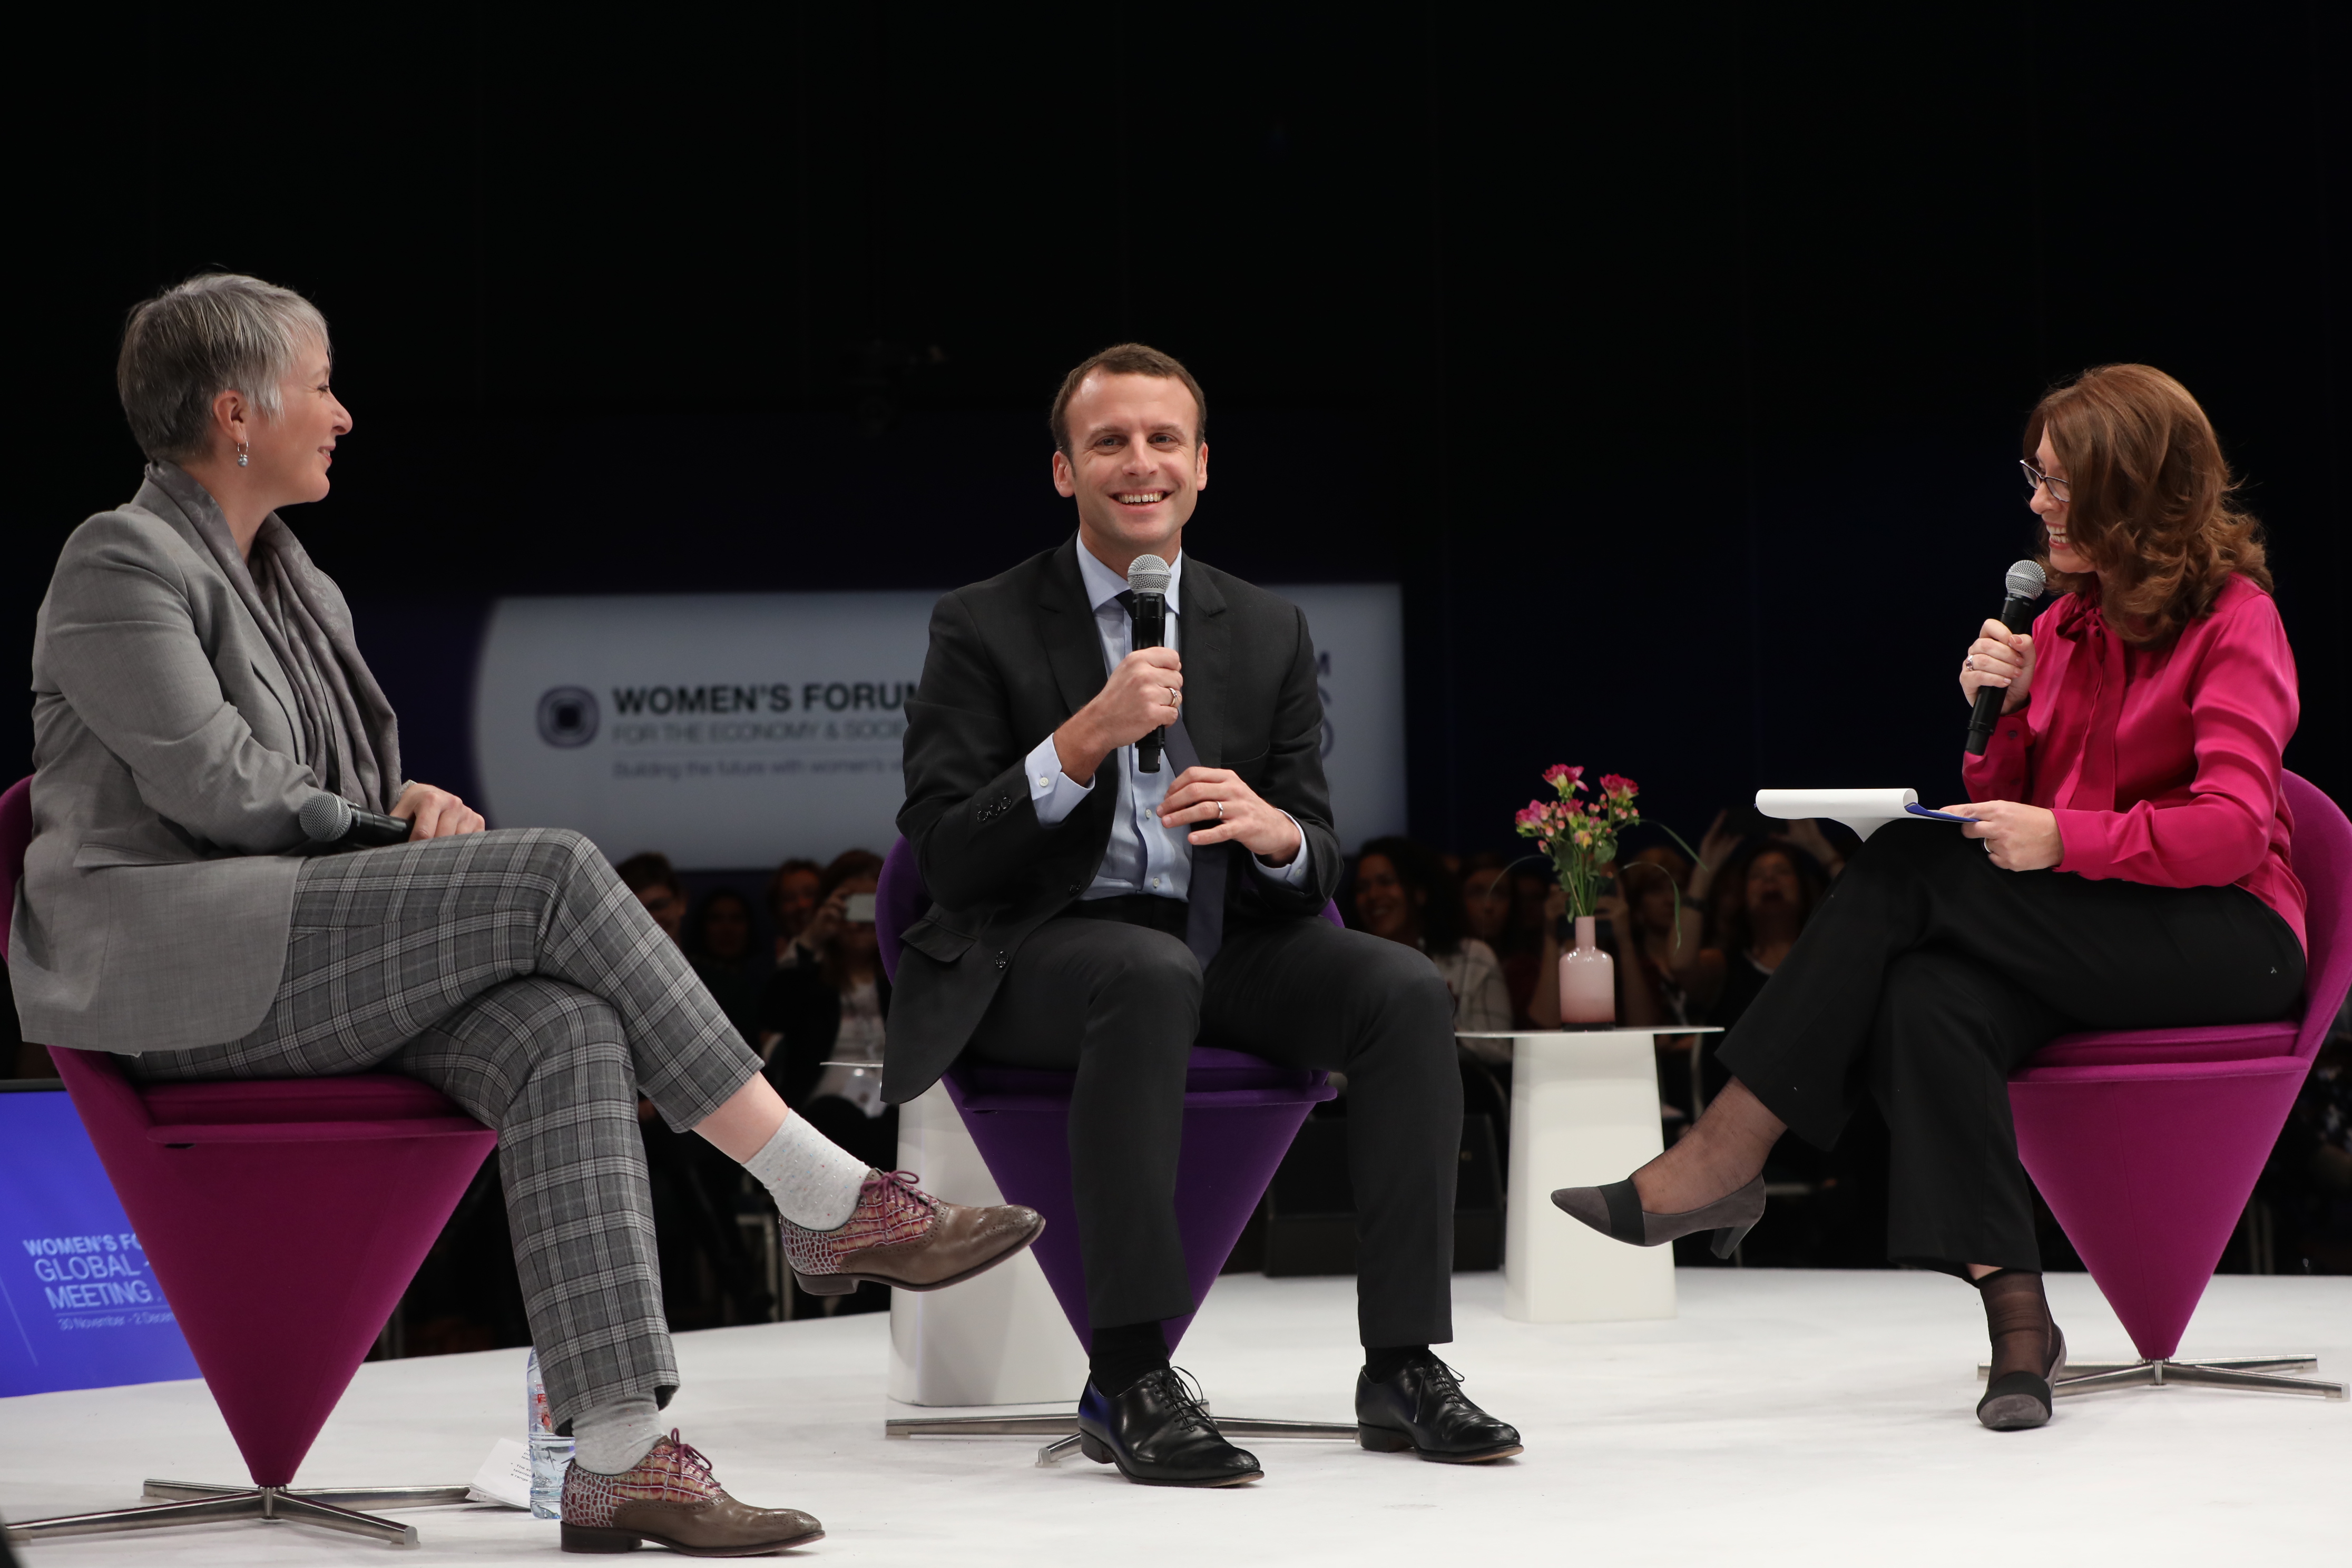 Patty Hajdu, Canada's Minister for Women, Emmanuel Macron, French Presidential Candidate, Claire Doole, Moderator.